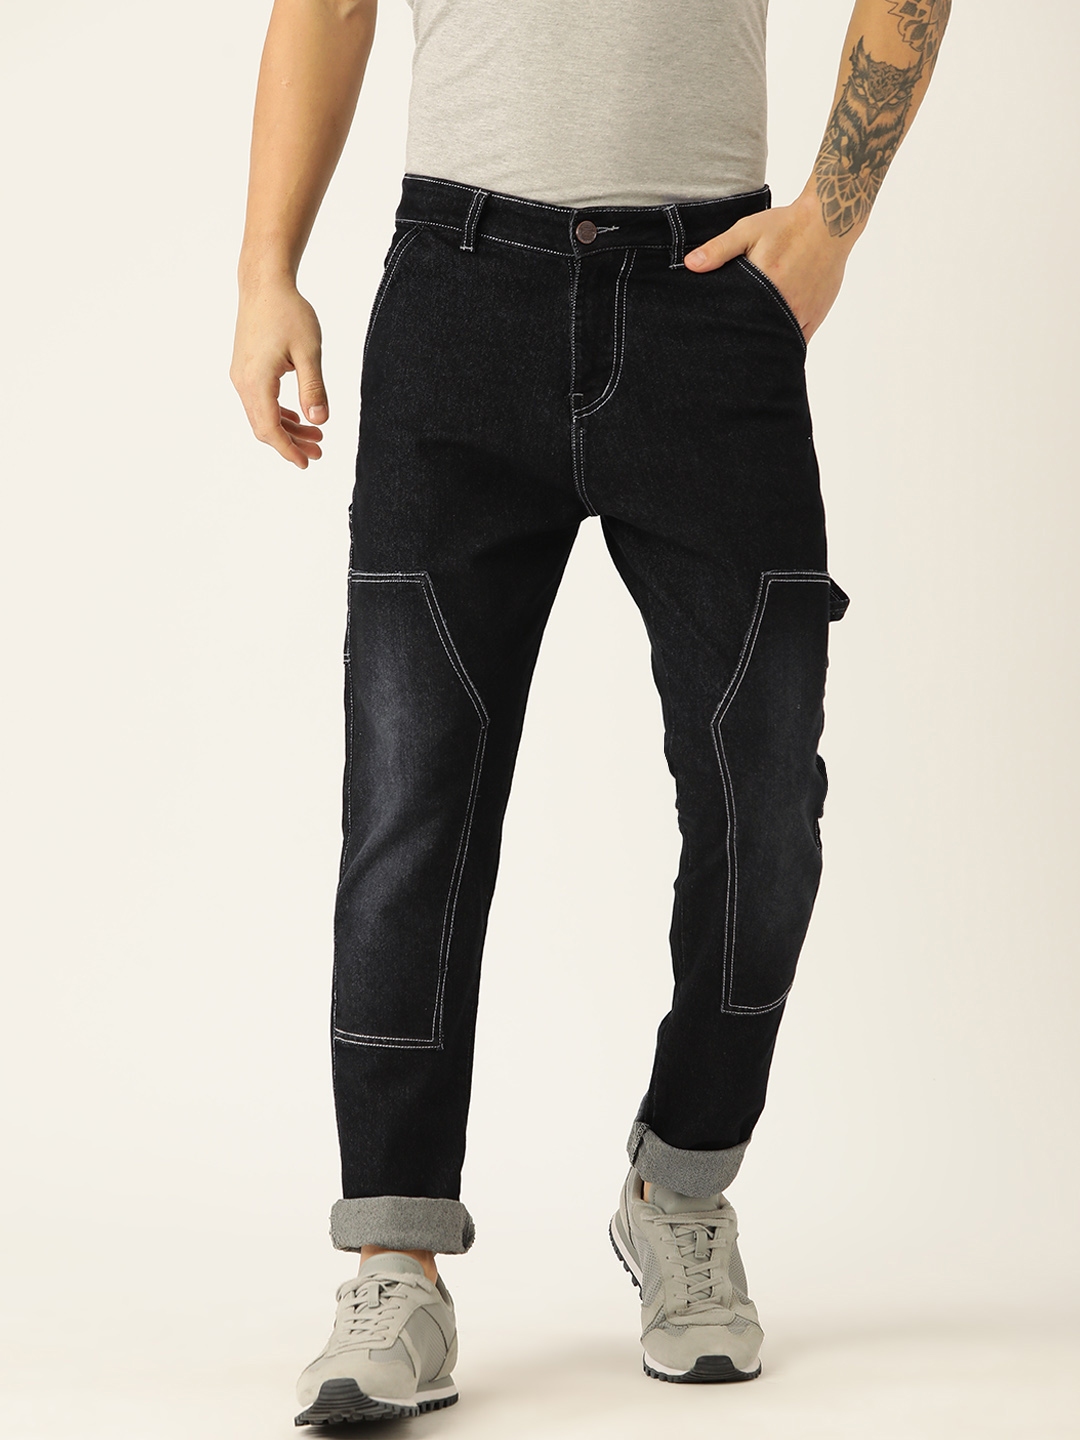 What does everyone choose for cargo pants? - Tistabene